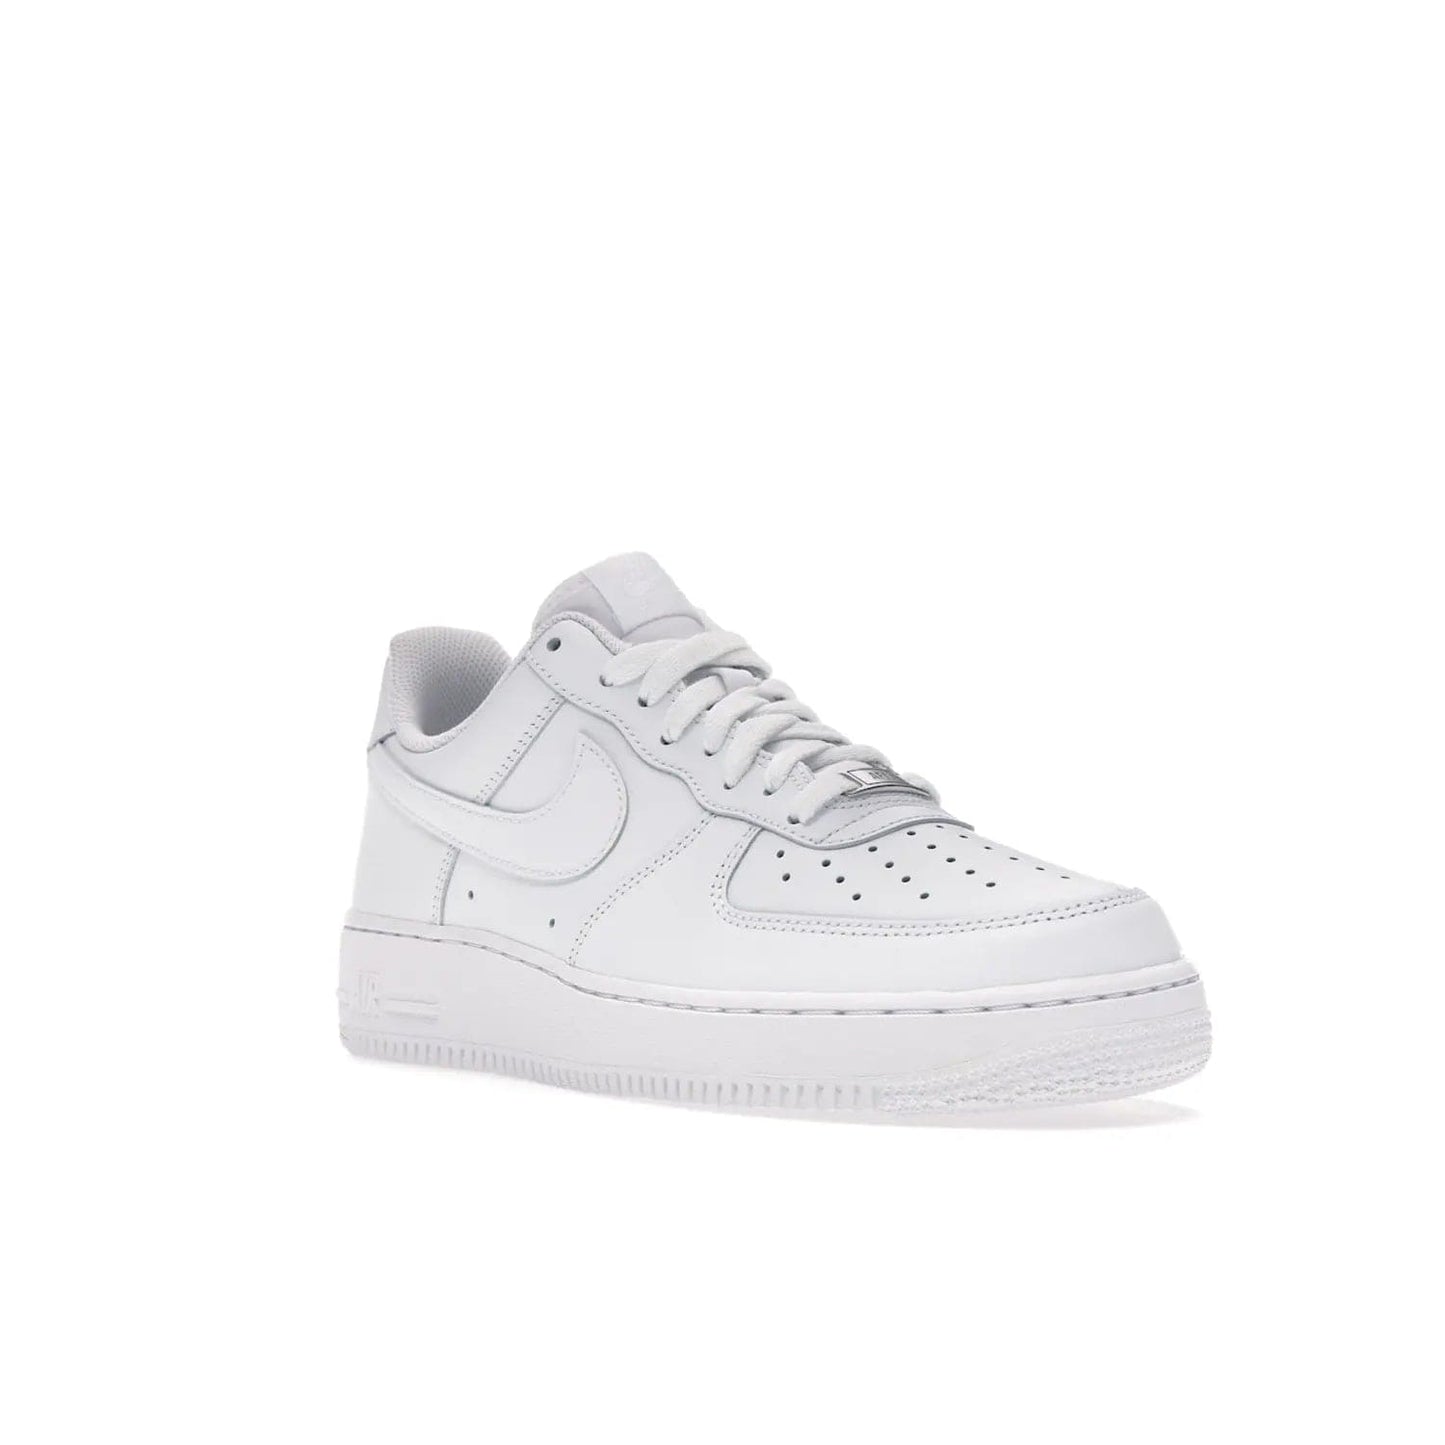 Nike Air Force 1 Low '07 White - Image 6 - Only at www.BallersClubKickz.com - ##
Iconic Swoosh overlays and crisp white sole make the classic Nike Air Force 1 Low White '07 an essential colorway. Classic for seasoned heads and new fans alike.